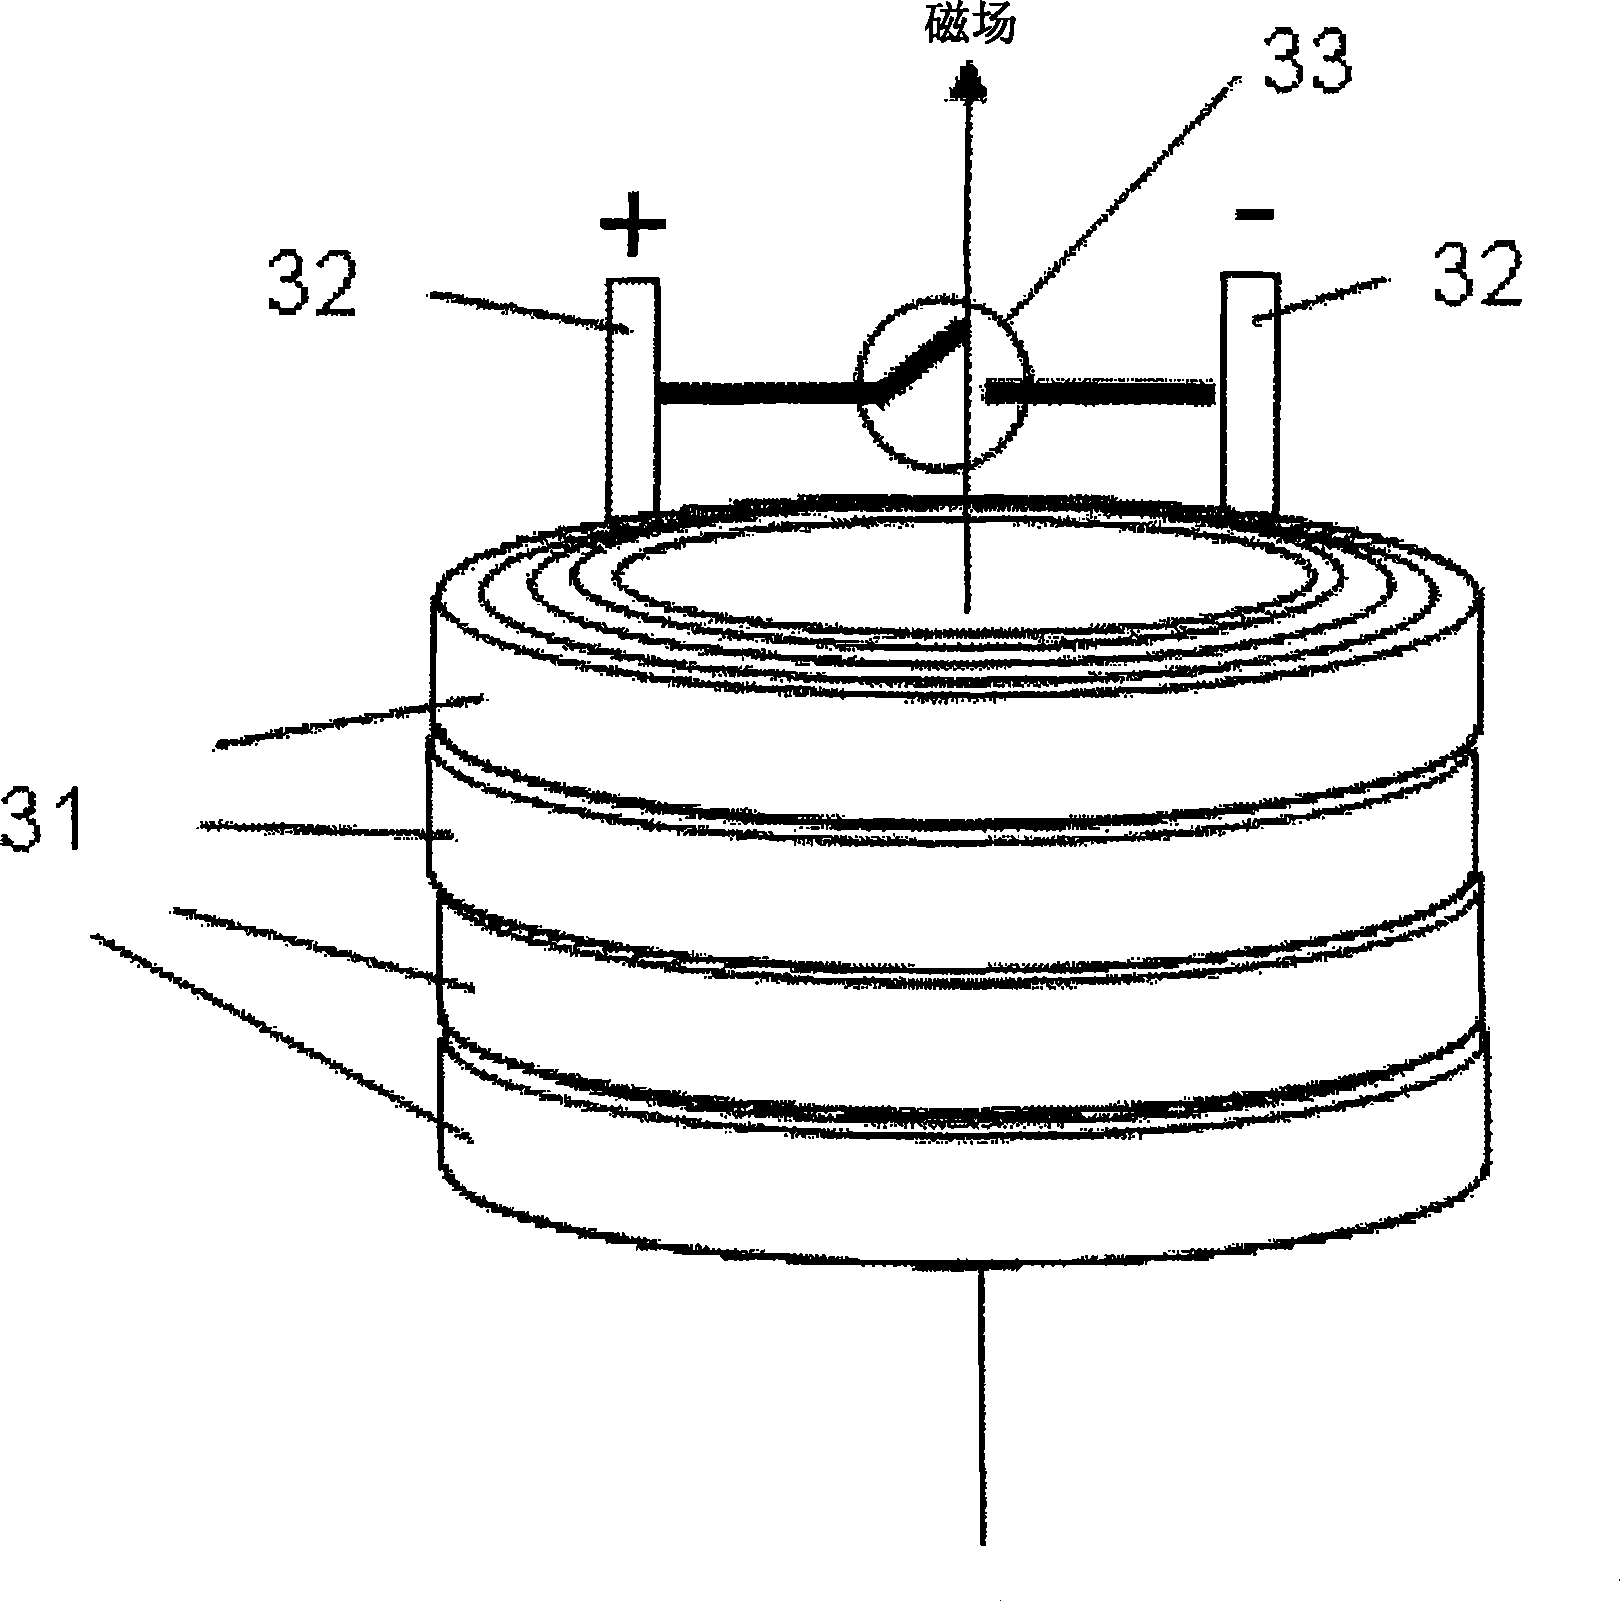 Superconducting oxide material, process for producing the same, and superconducting wire and superconduction apparatus both employing the superconducting material